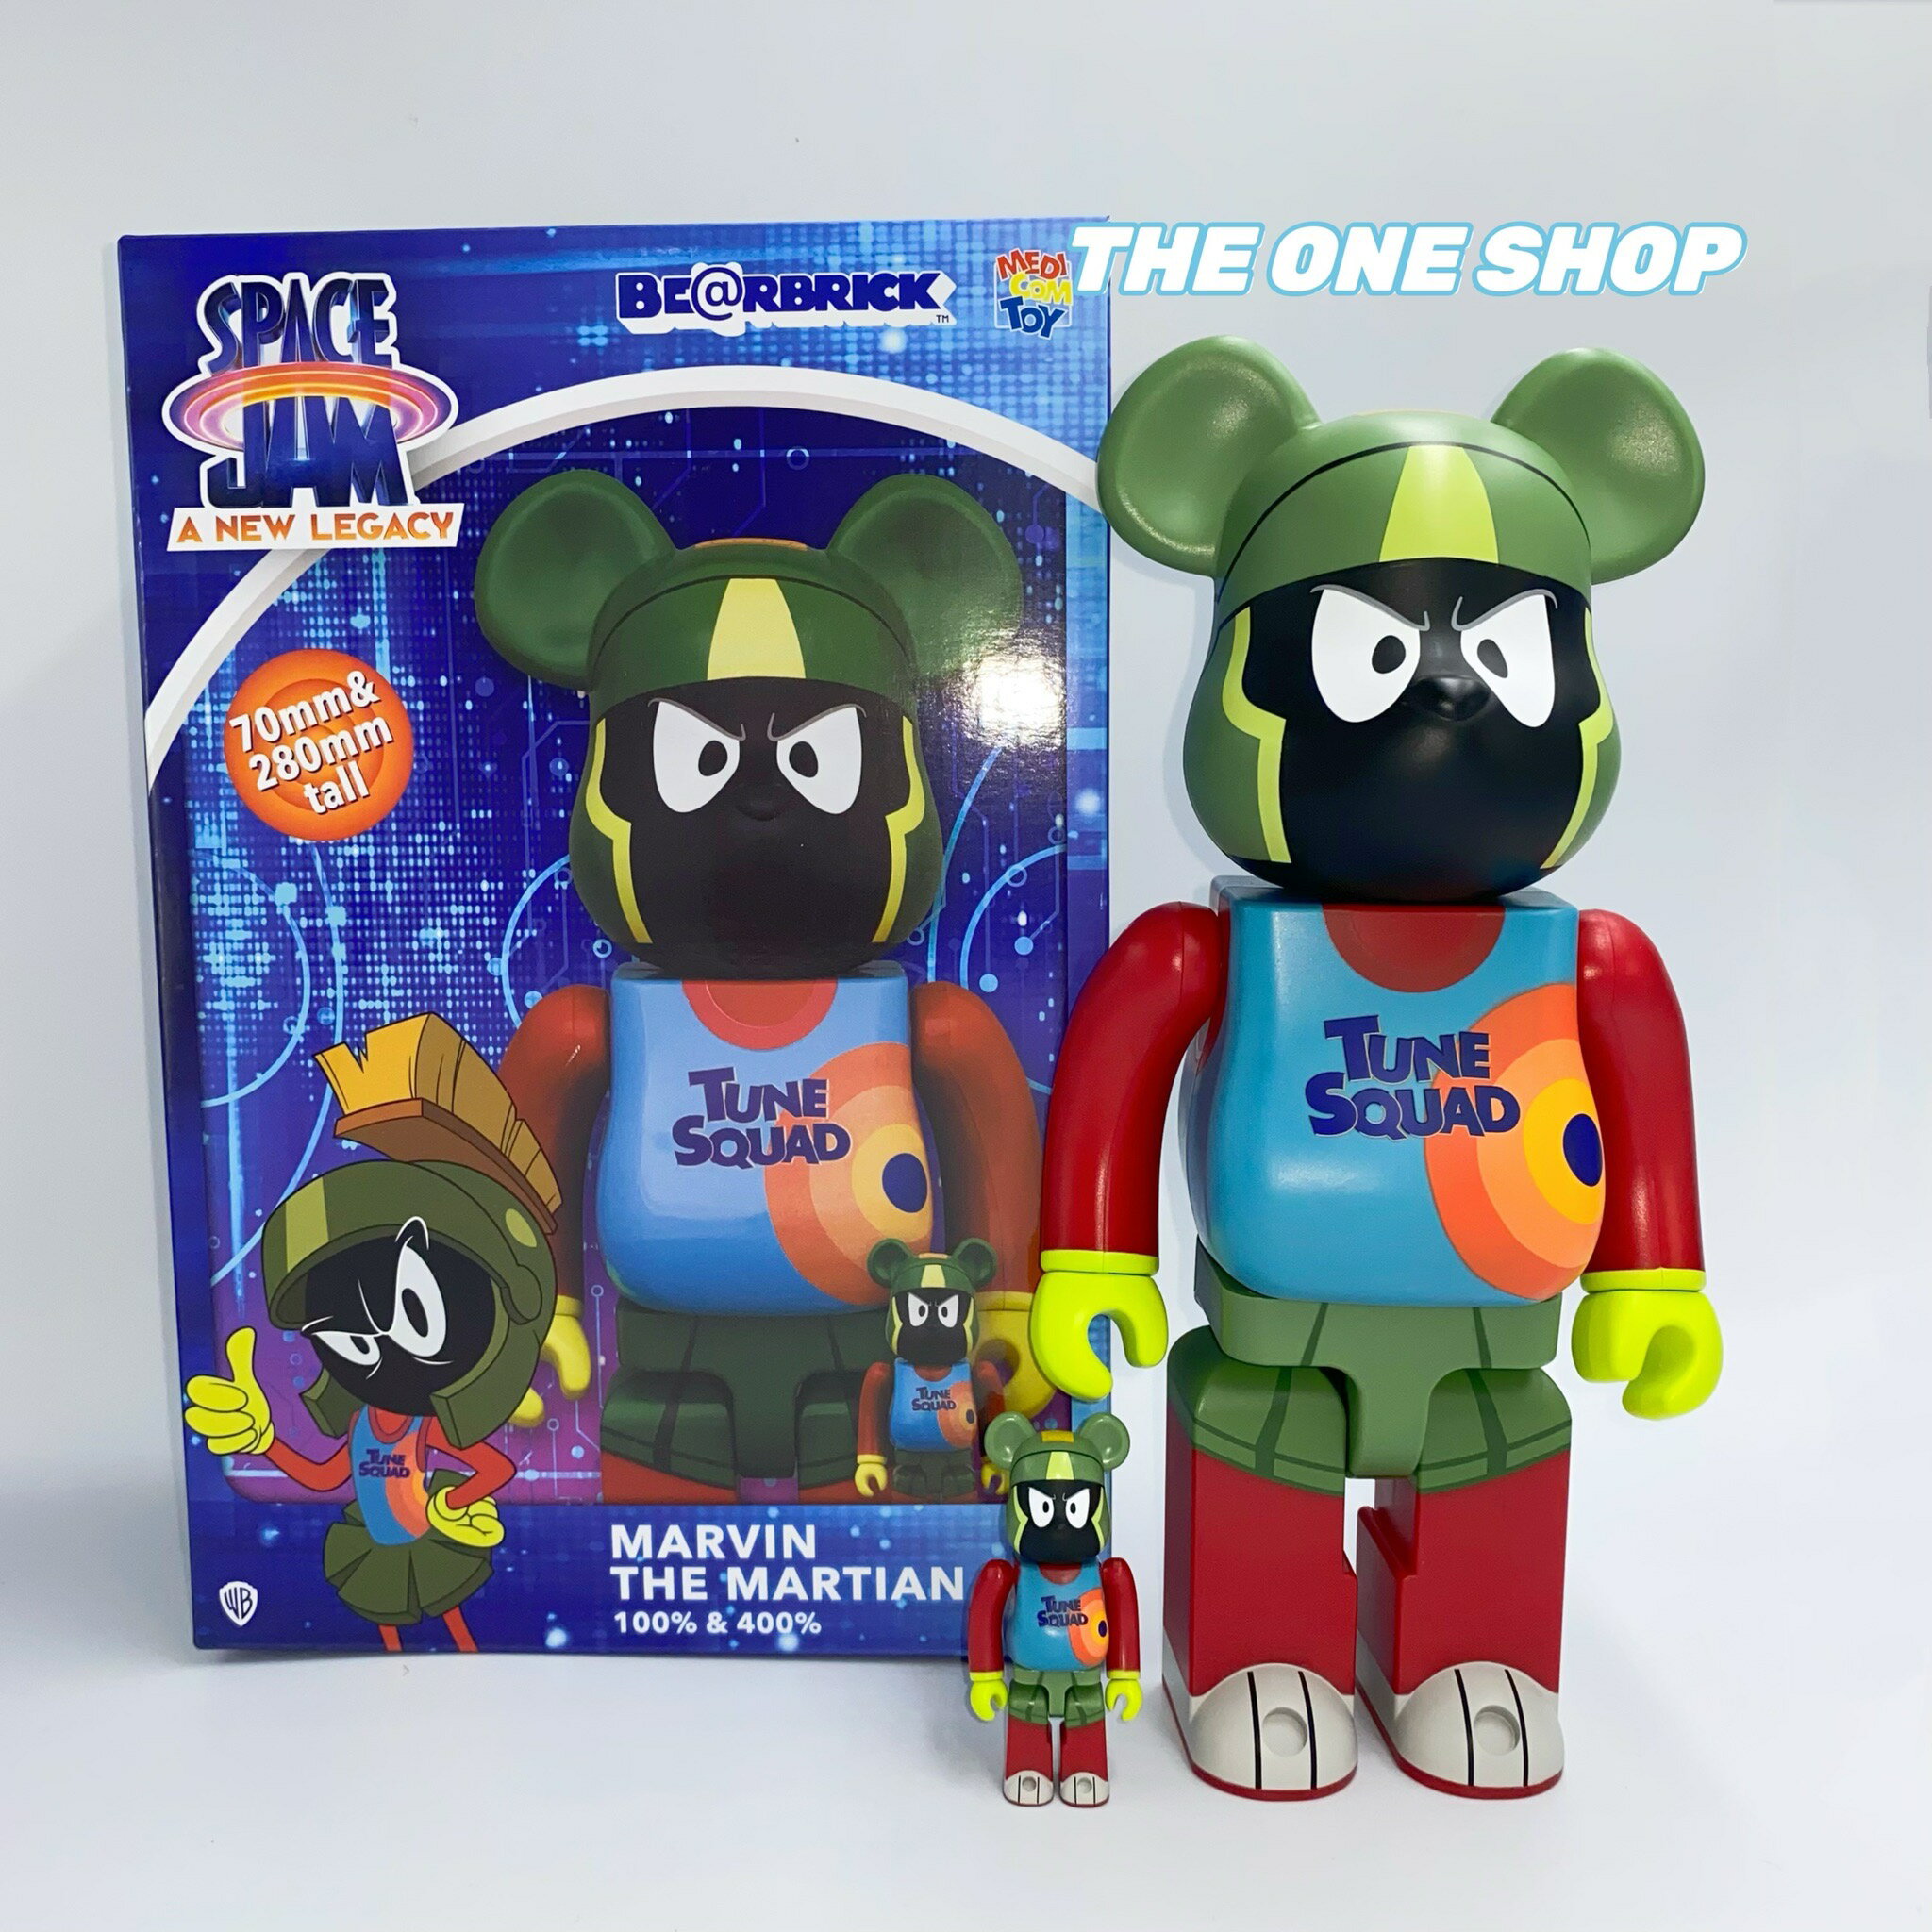 A NEW LEGACY MARVIN THE MARTIAN 1000%